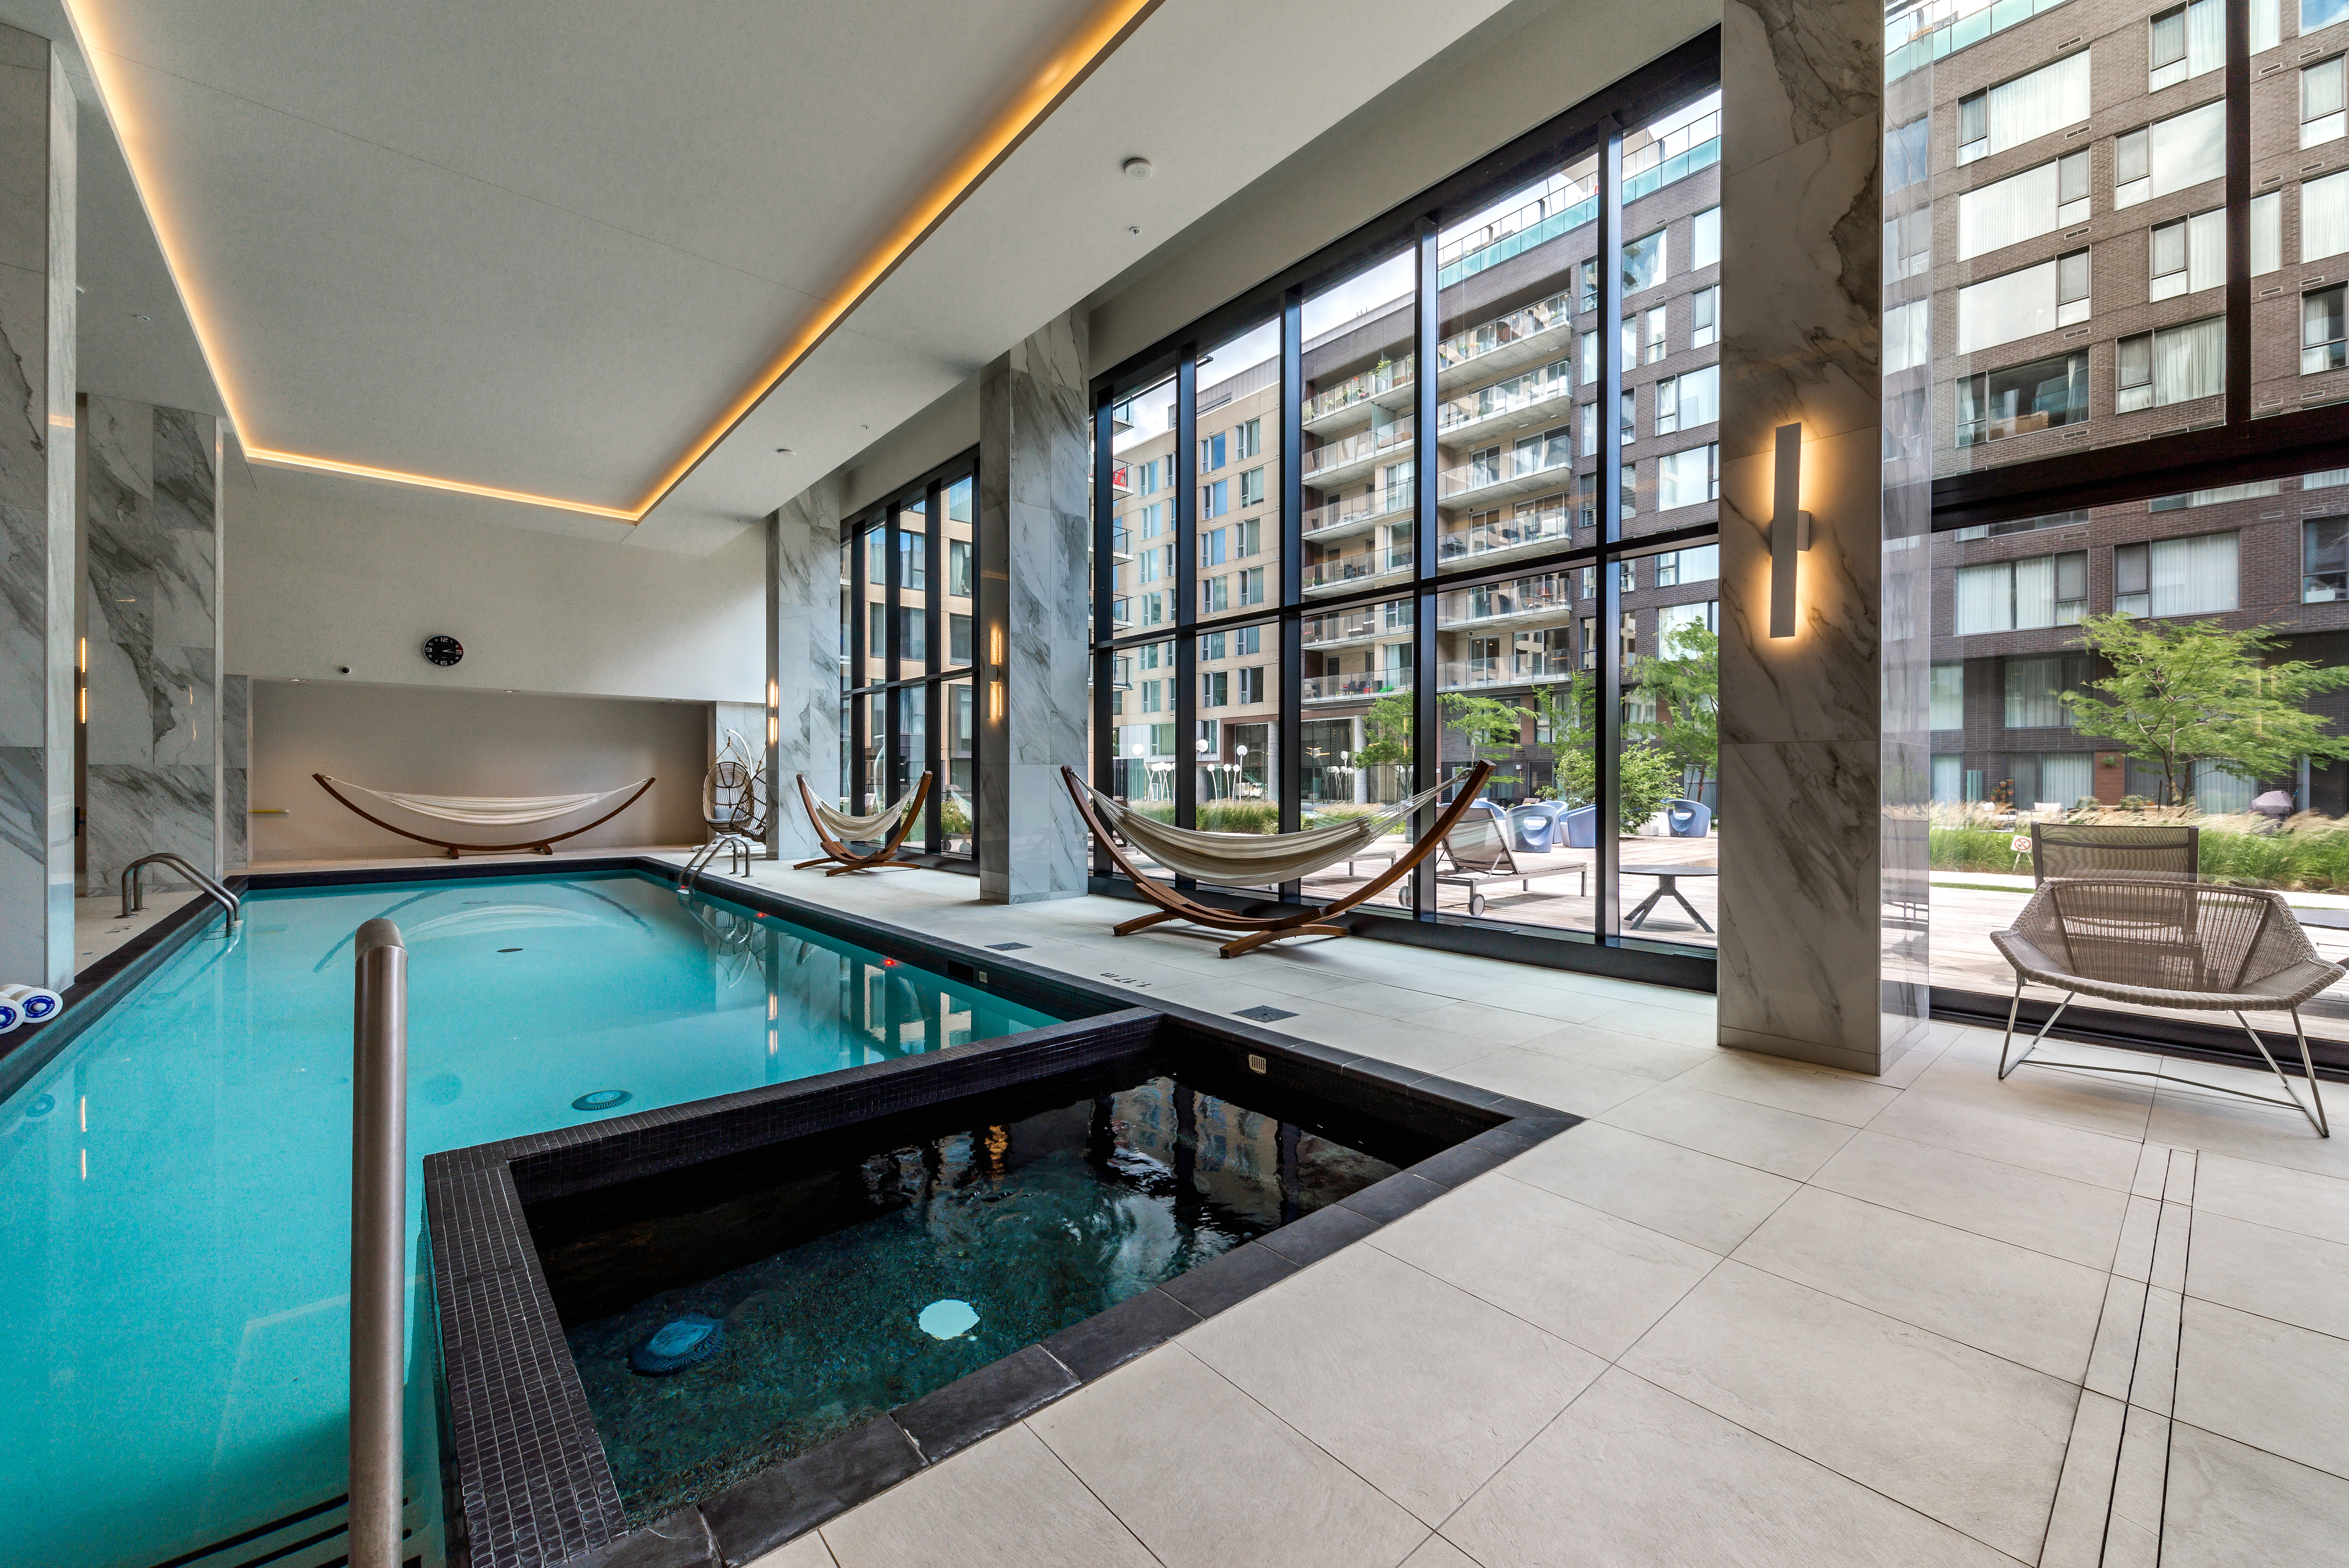 Luxury apartment building with a pool